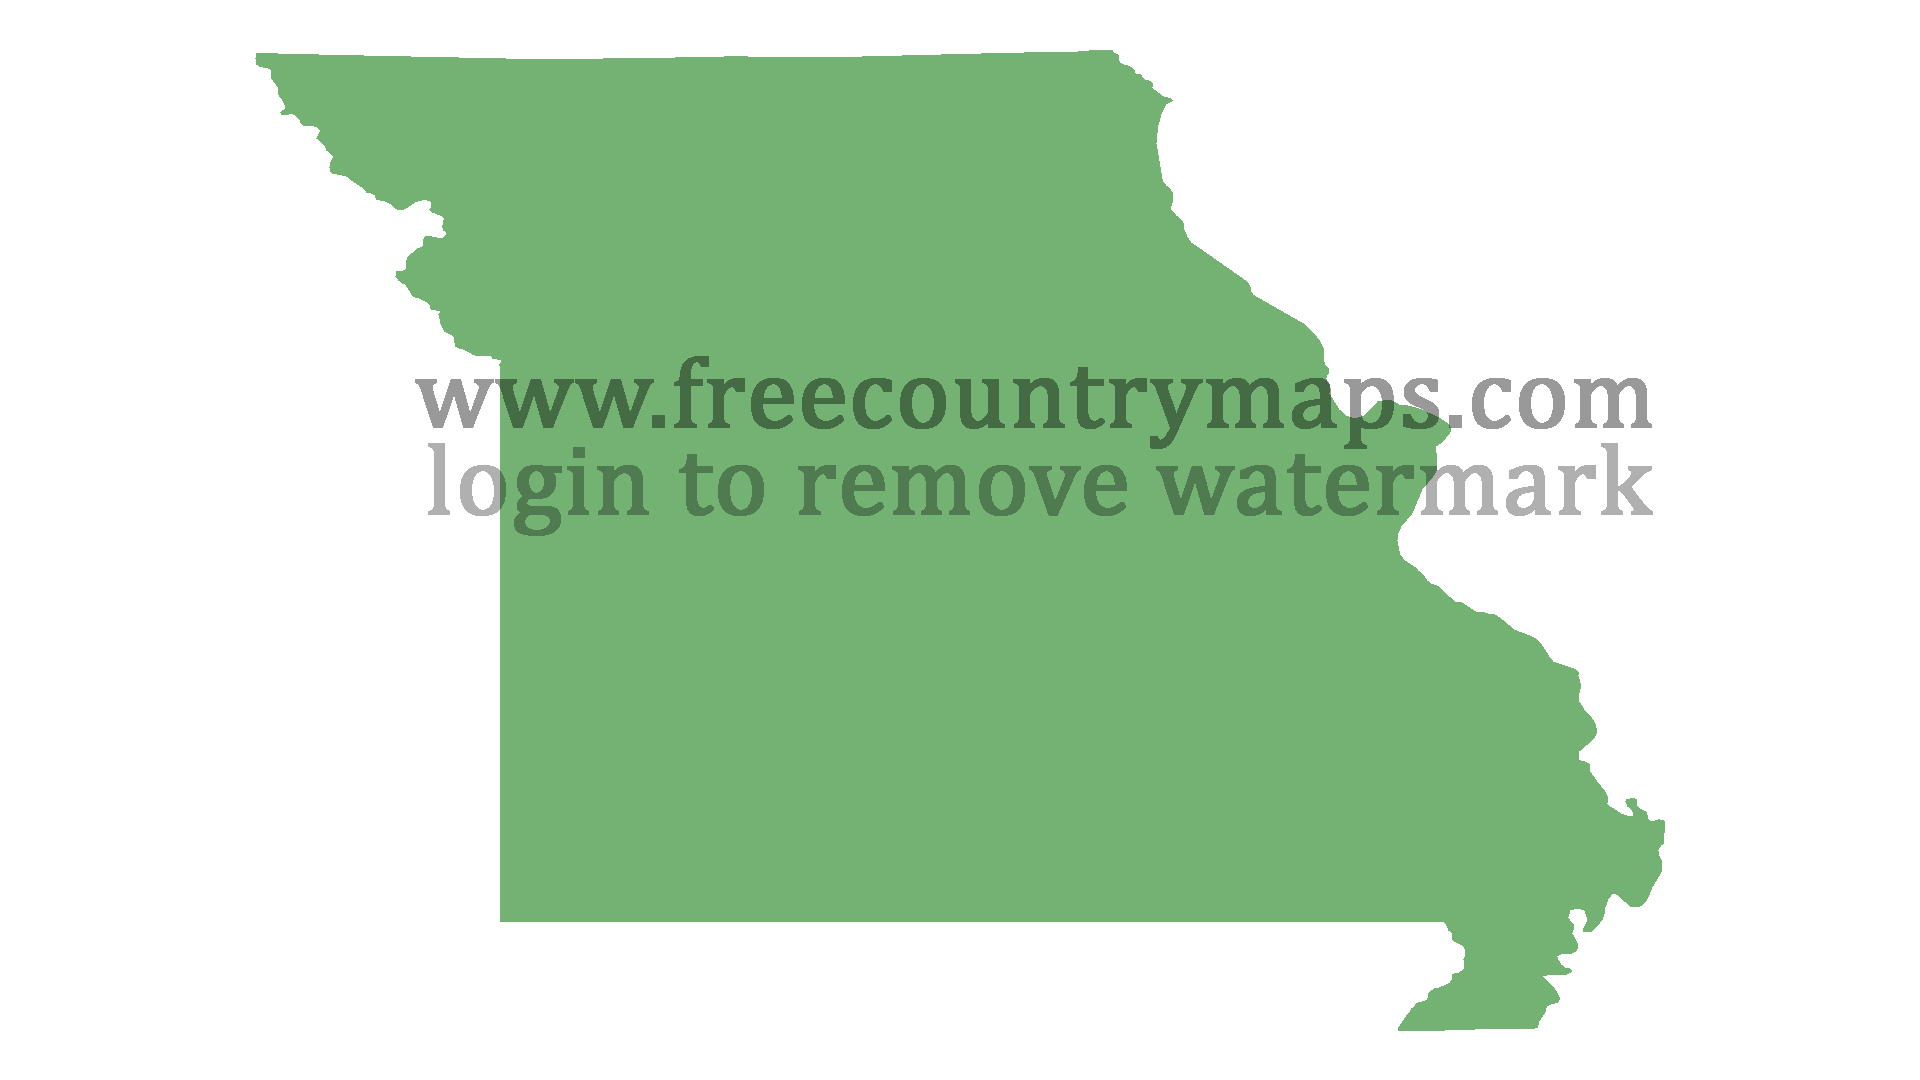 Blank Map of the State of Missouri in 1080p